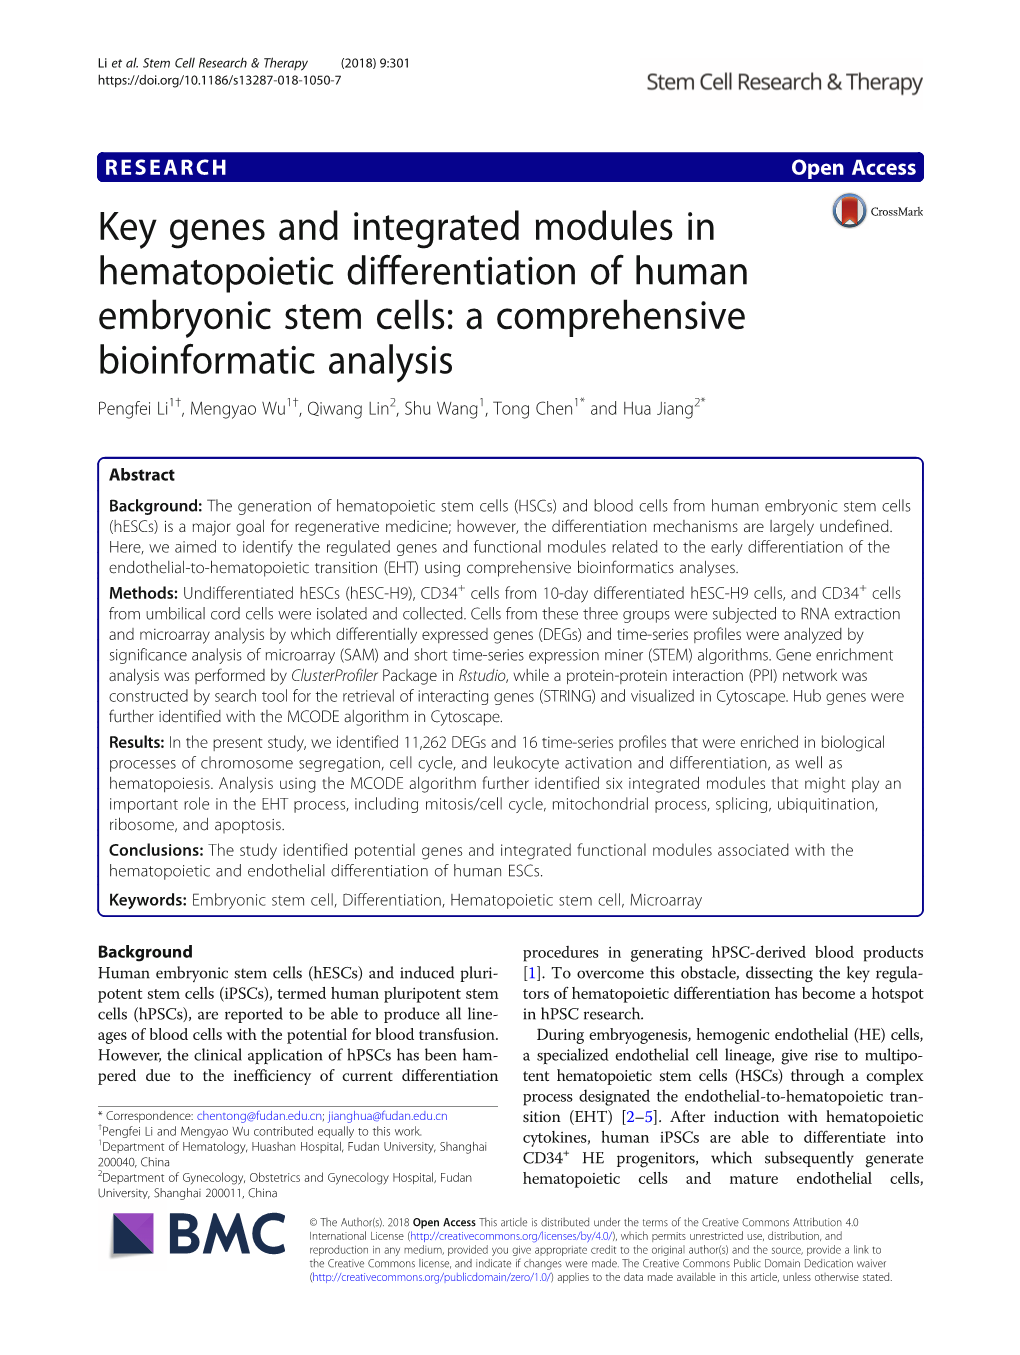 Key Genes and Integrated Modules In